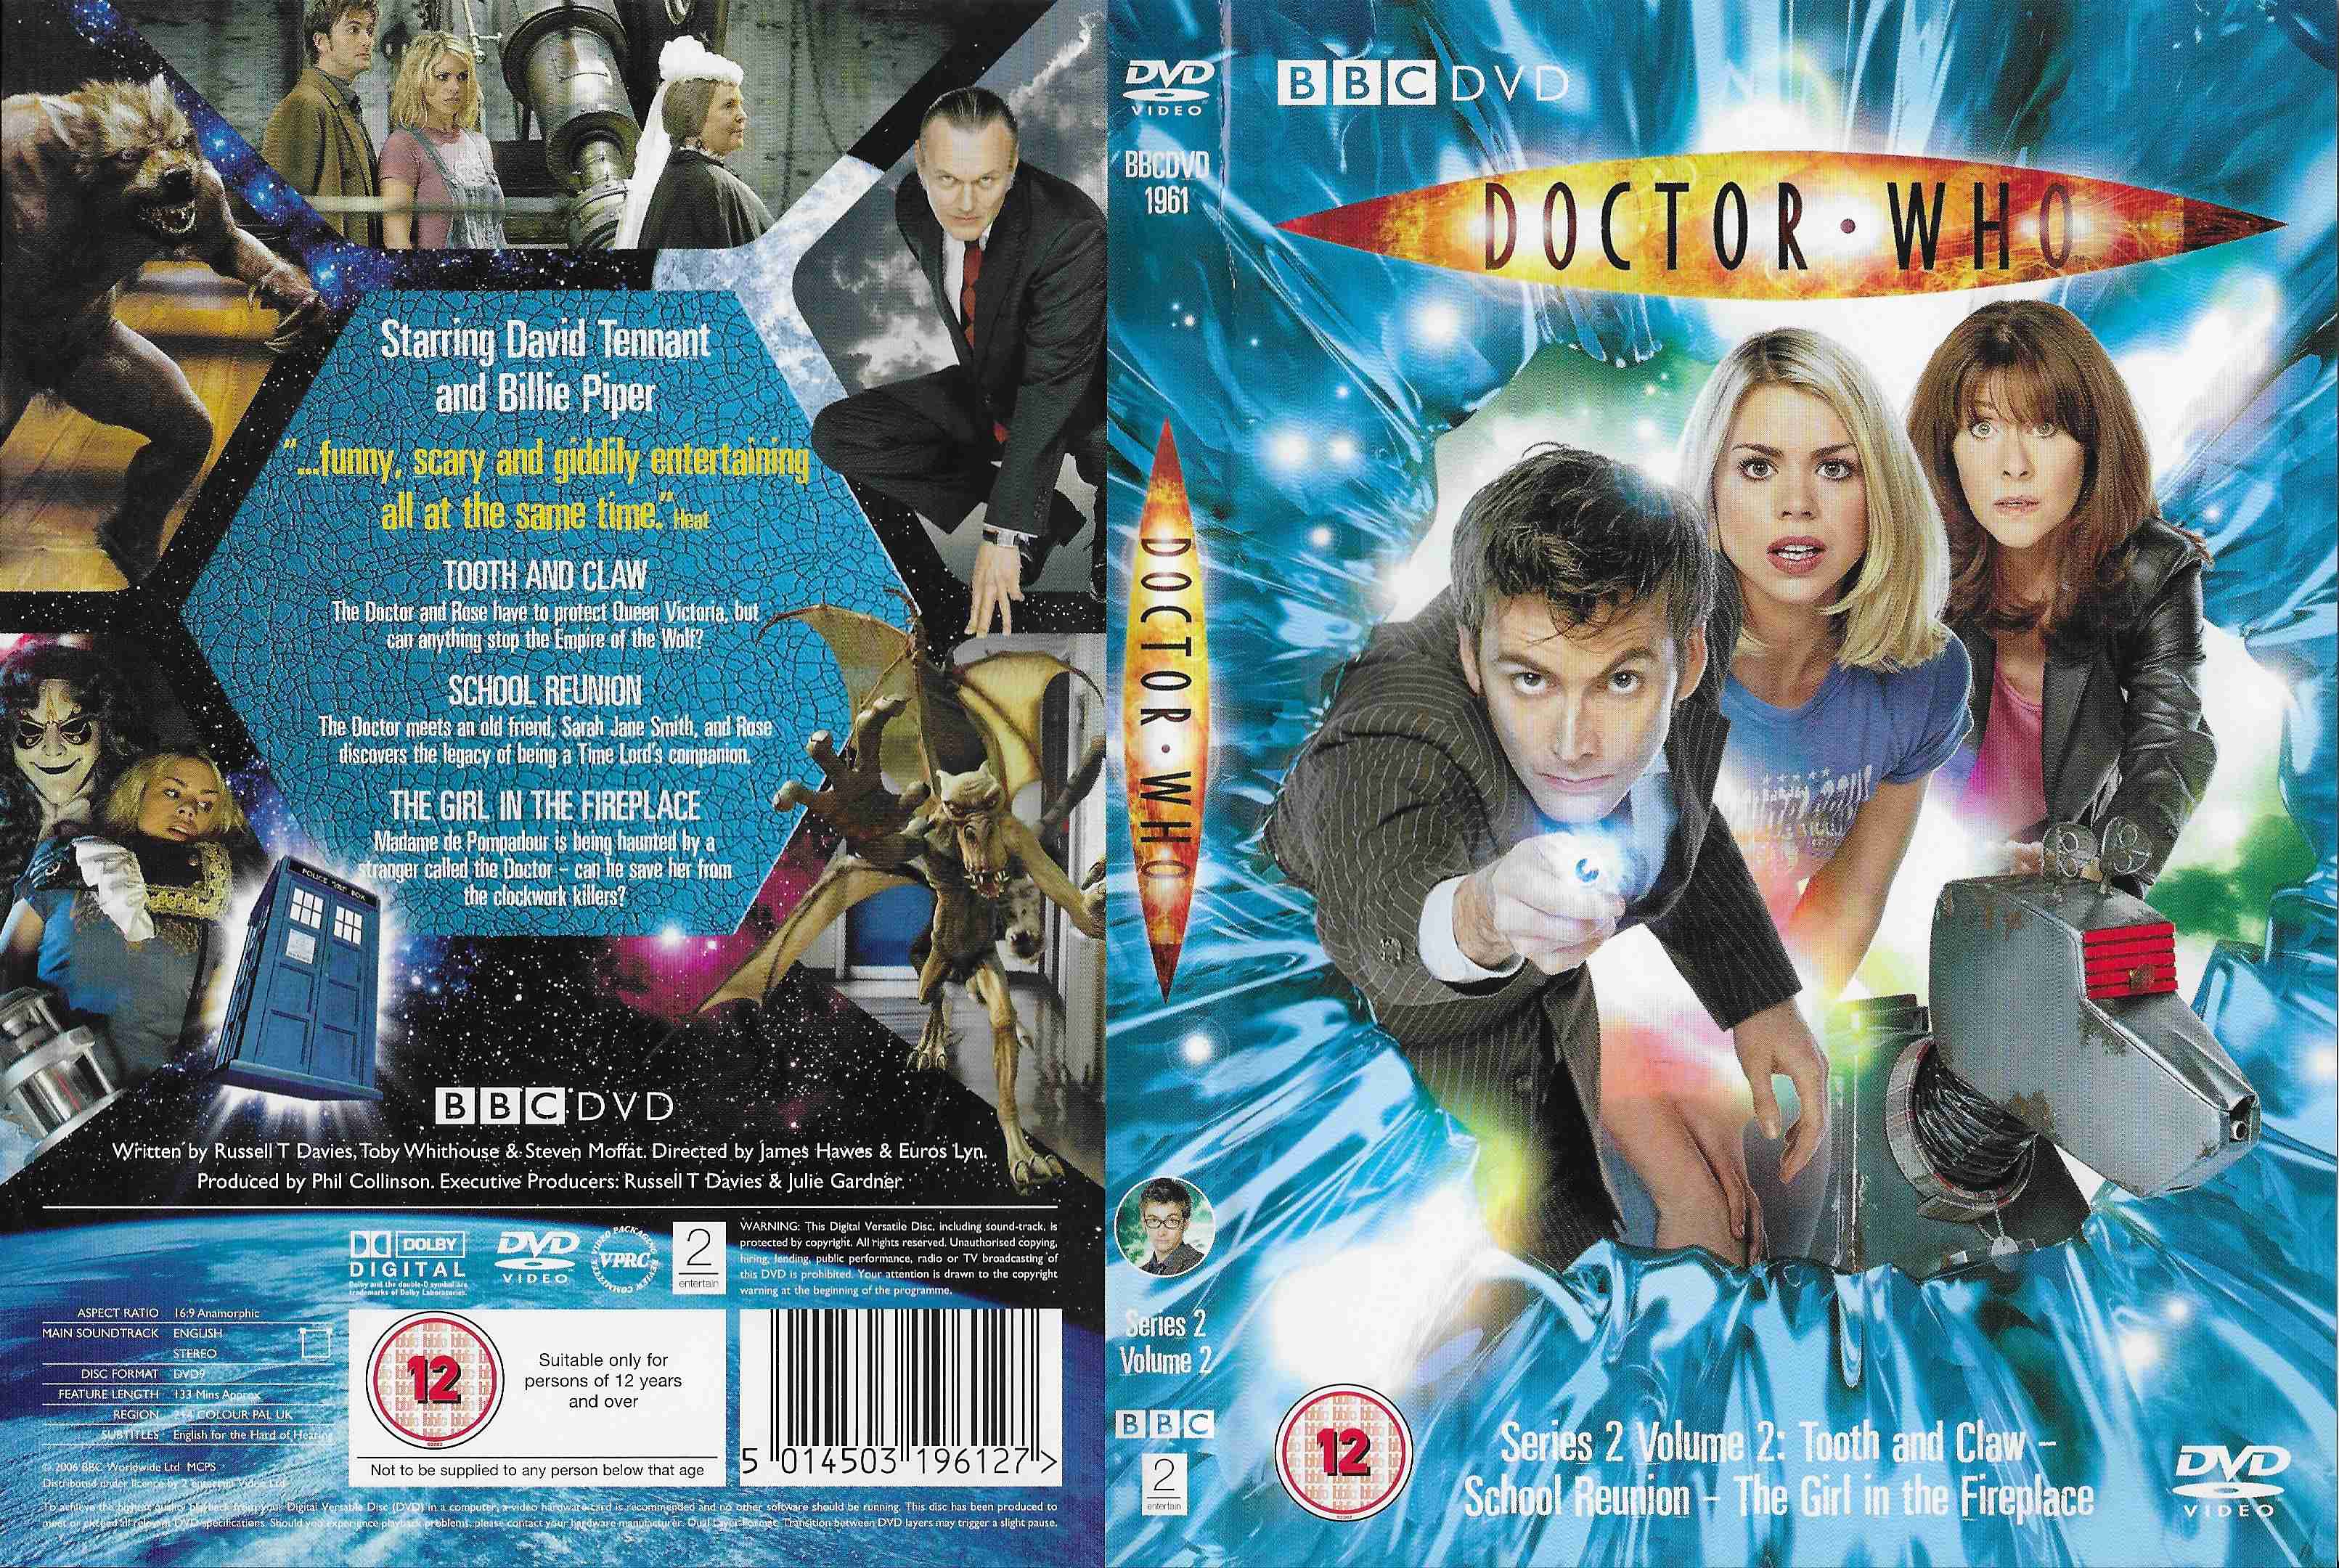 Picture of BBCDVD 1961 Doctor Who - Series 2, volume 2 by artist Russell T Davies / Toby Whithouse / Steven Moffat from the BBC records and Tapes library